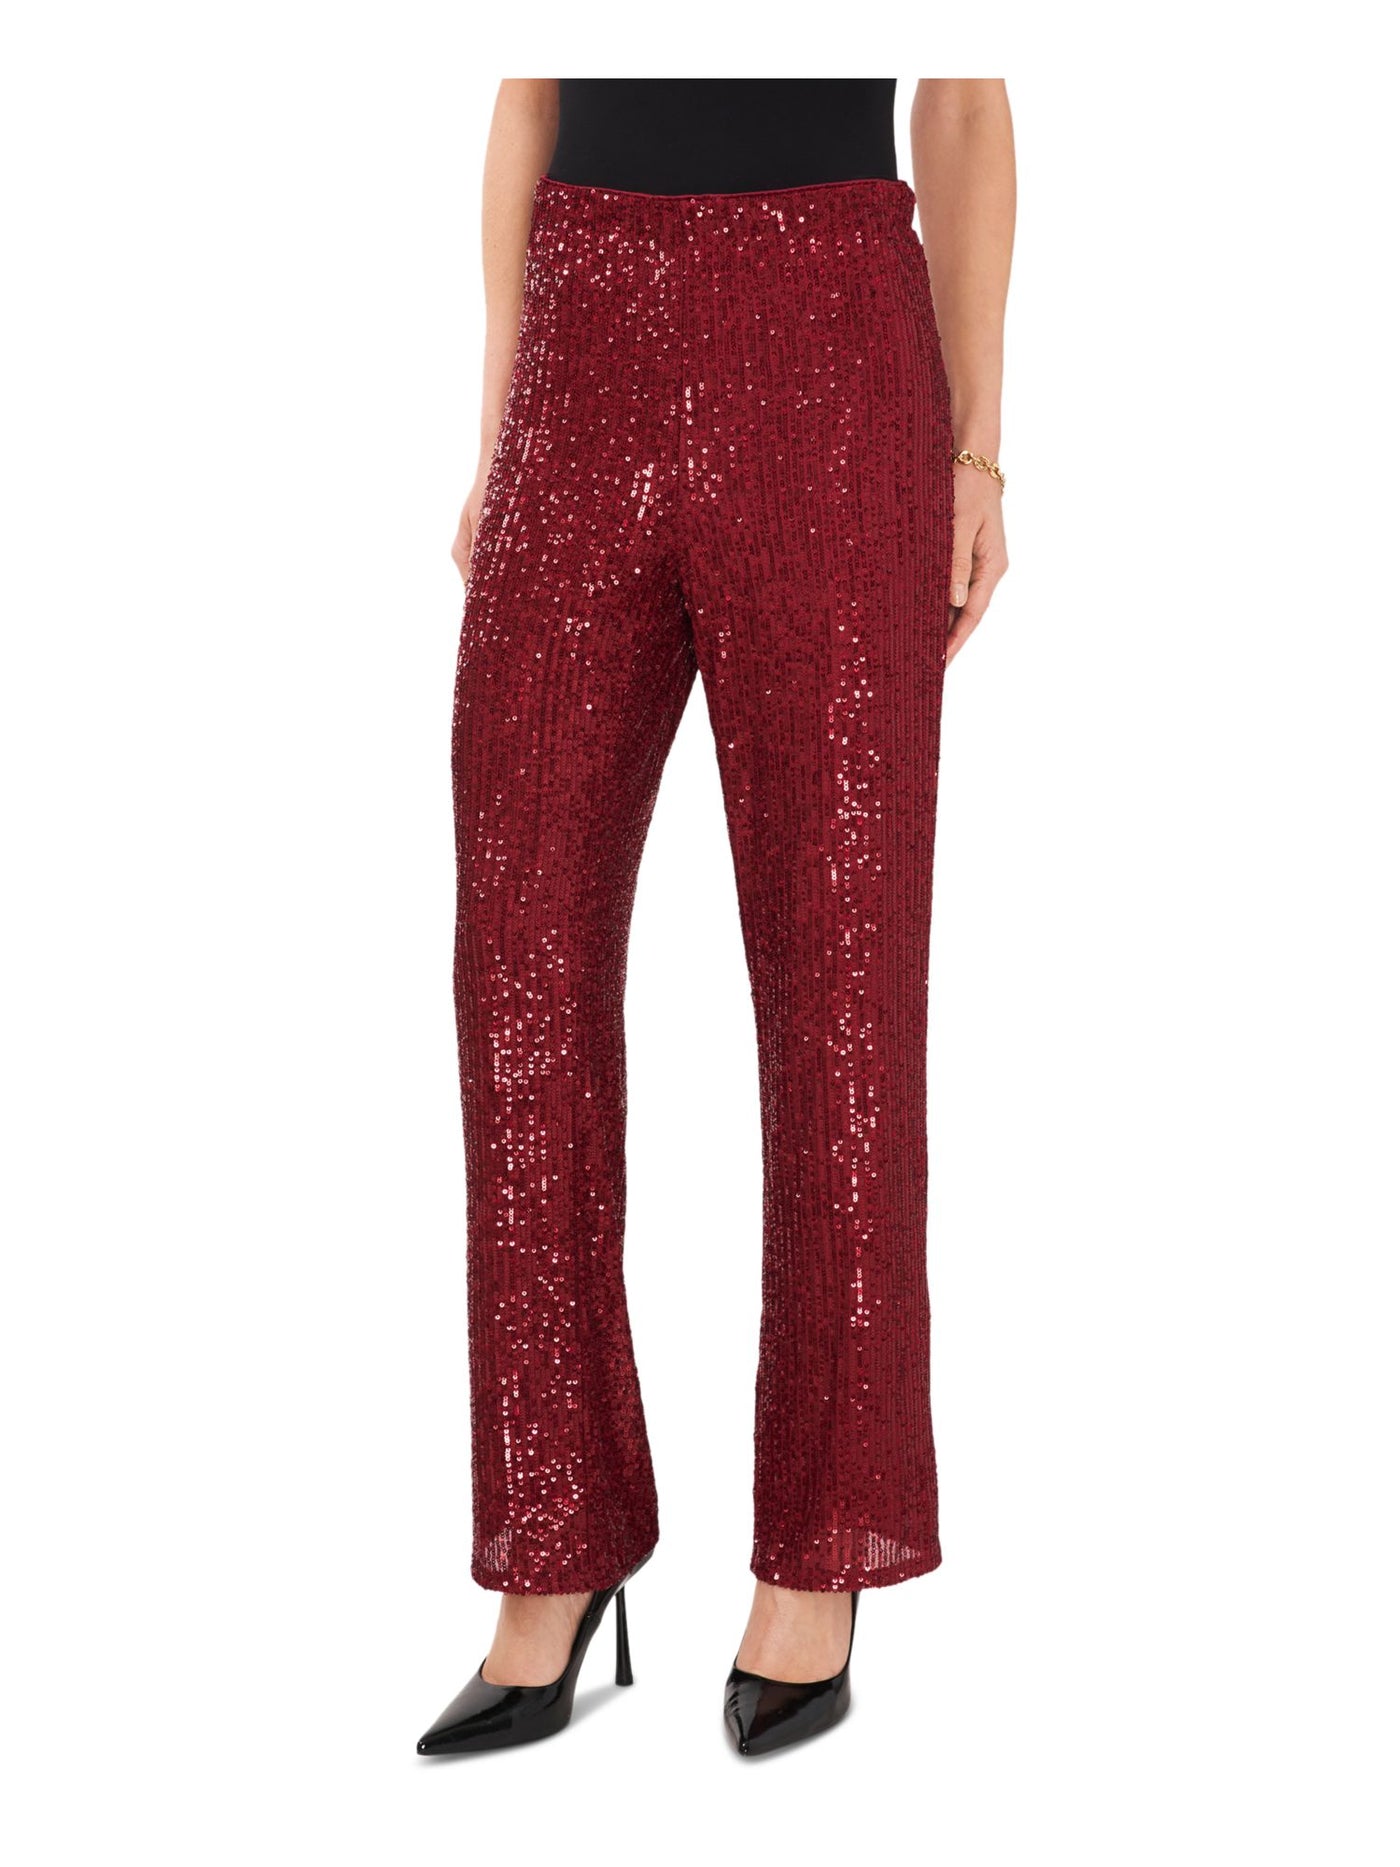 VINCE CAMUTO Womens Red Sequined Elastic Waist Pull On Cocktail Flare Pants M